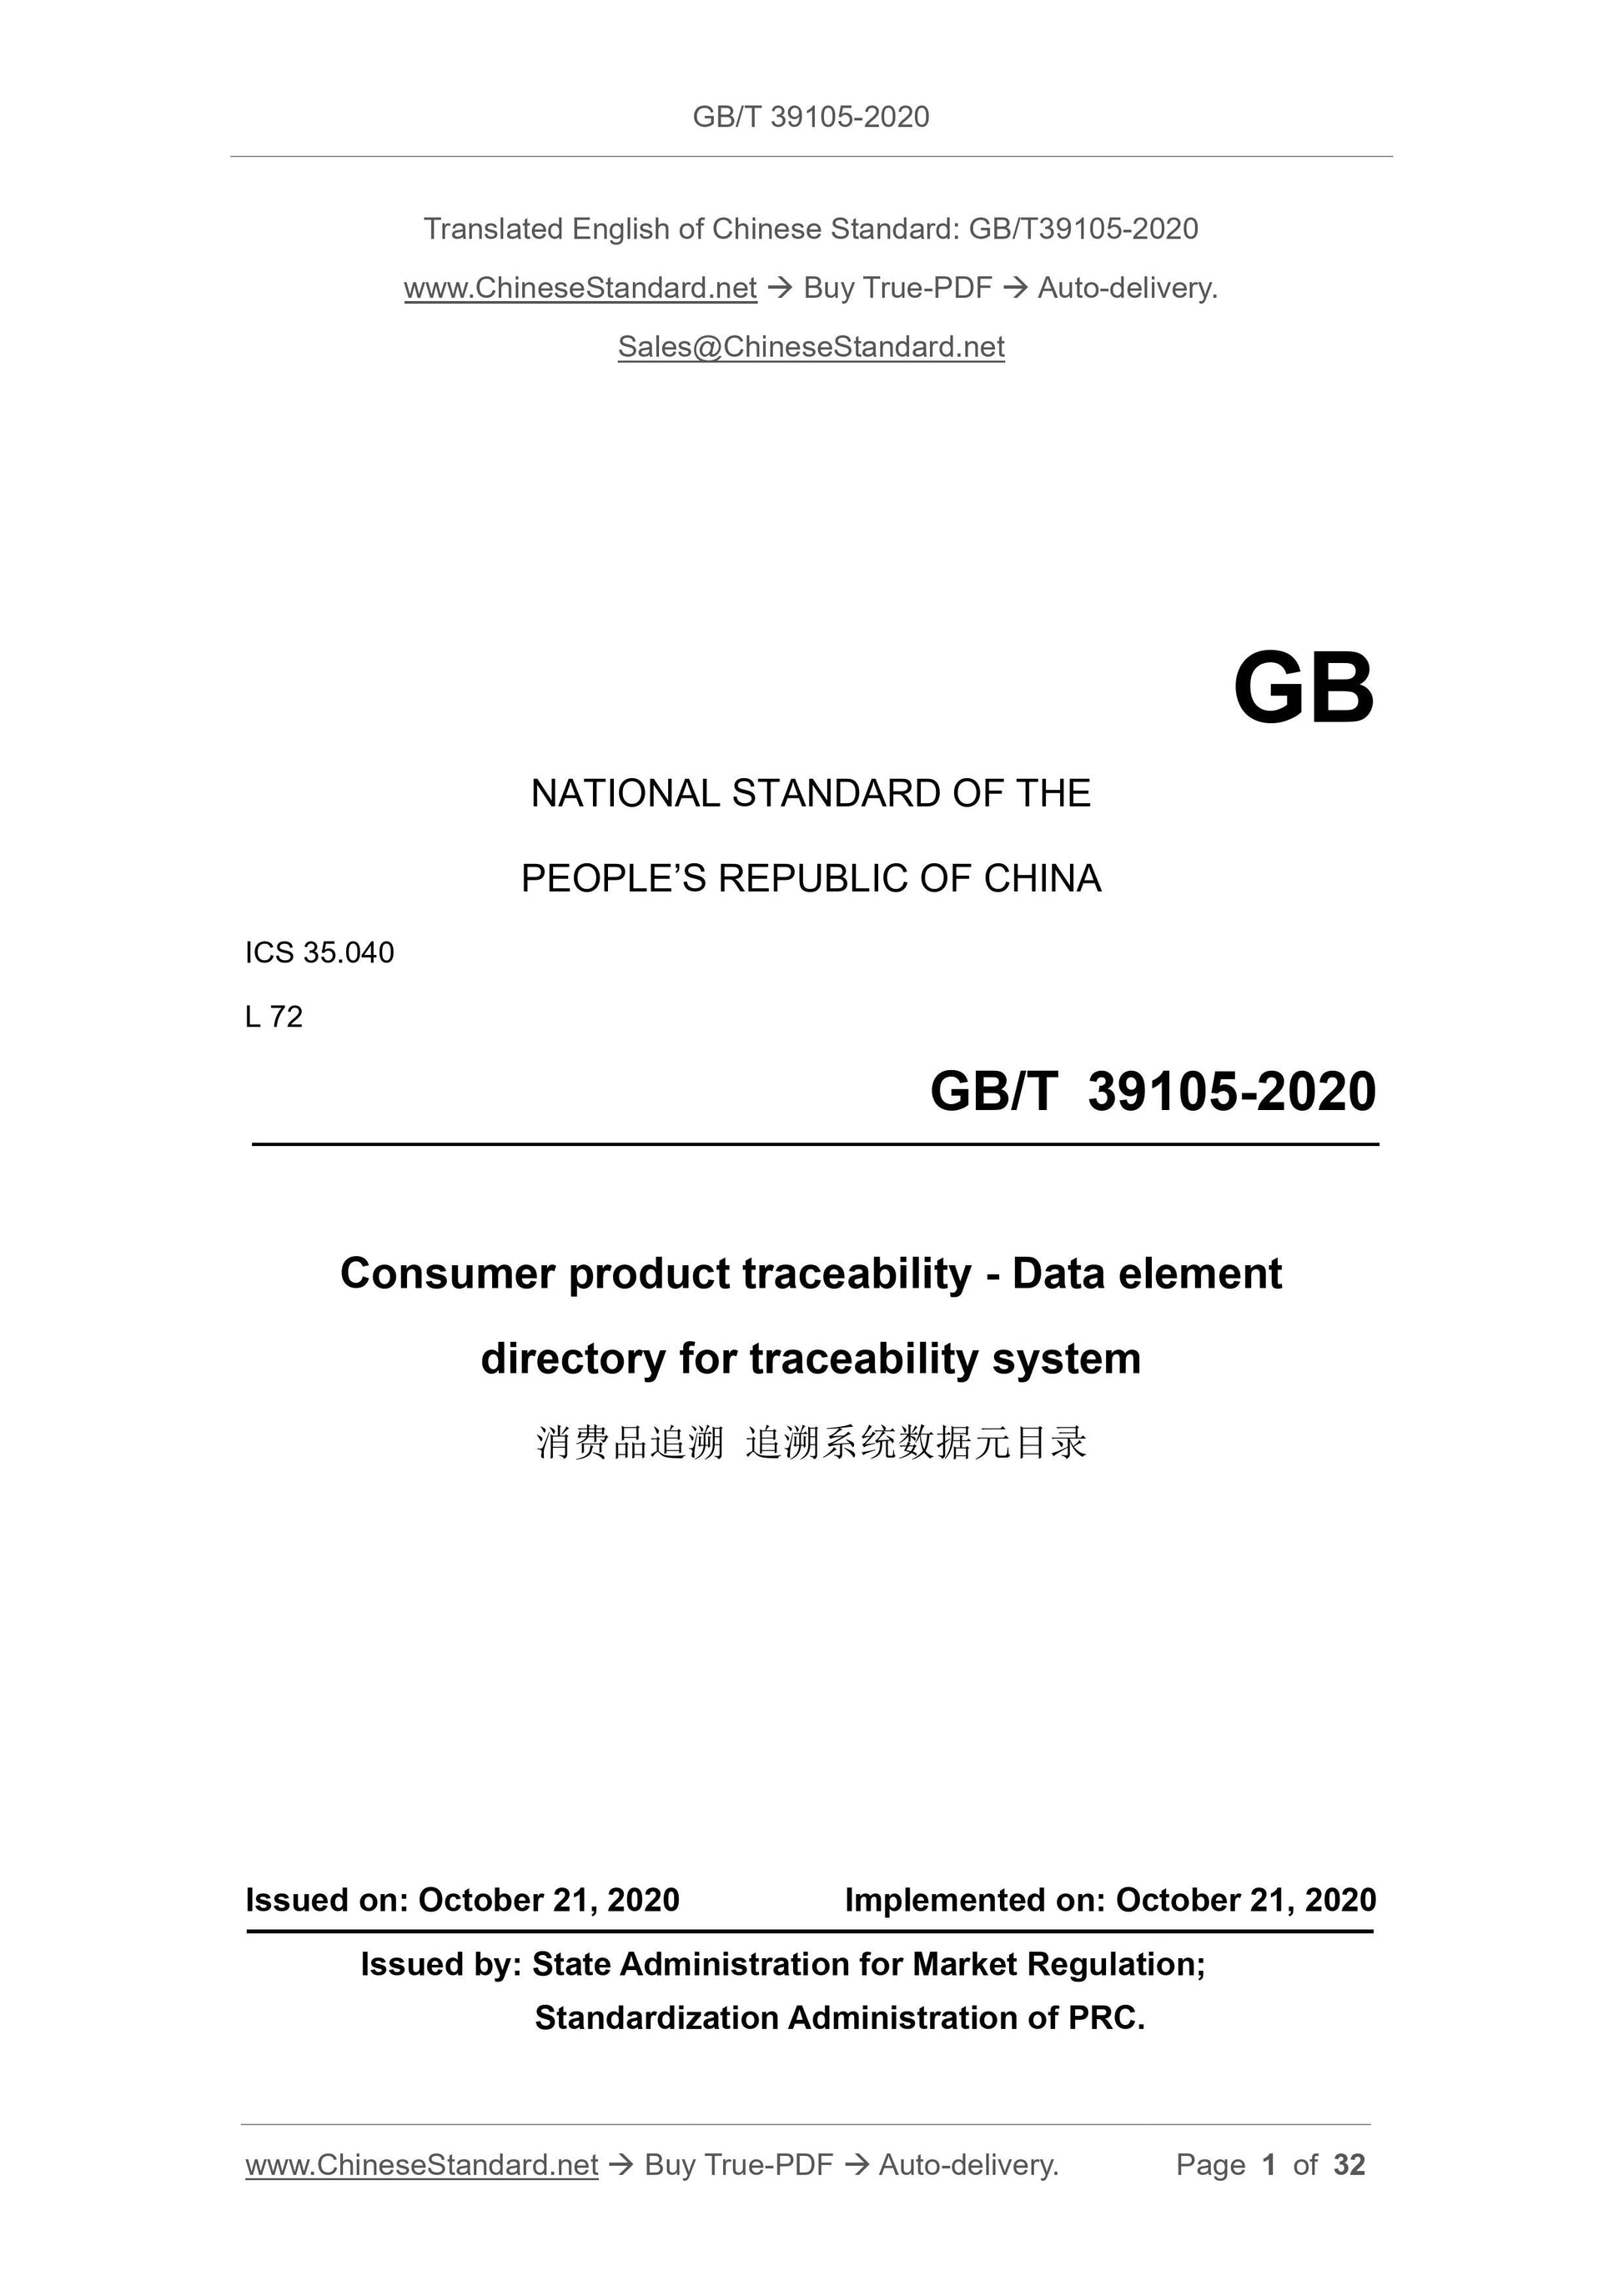 GB/T 39105-2020 Page 1